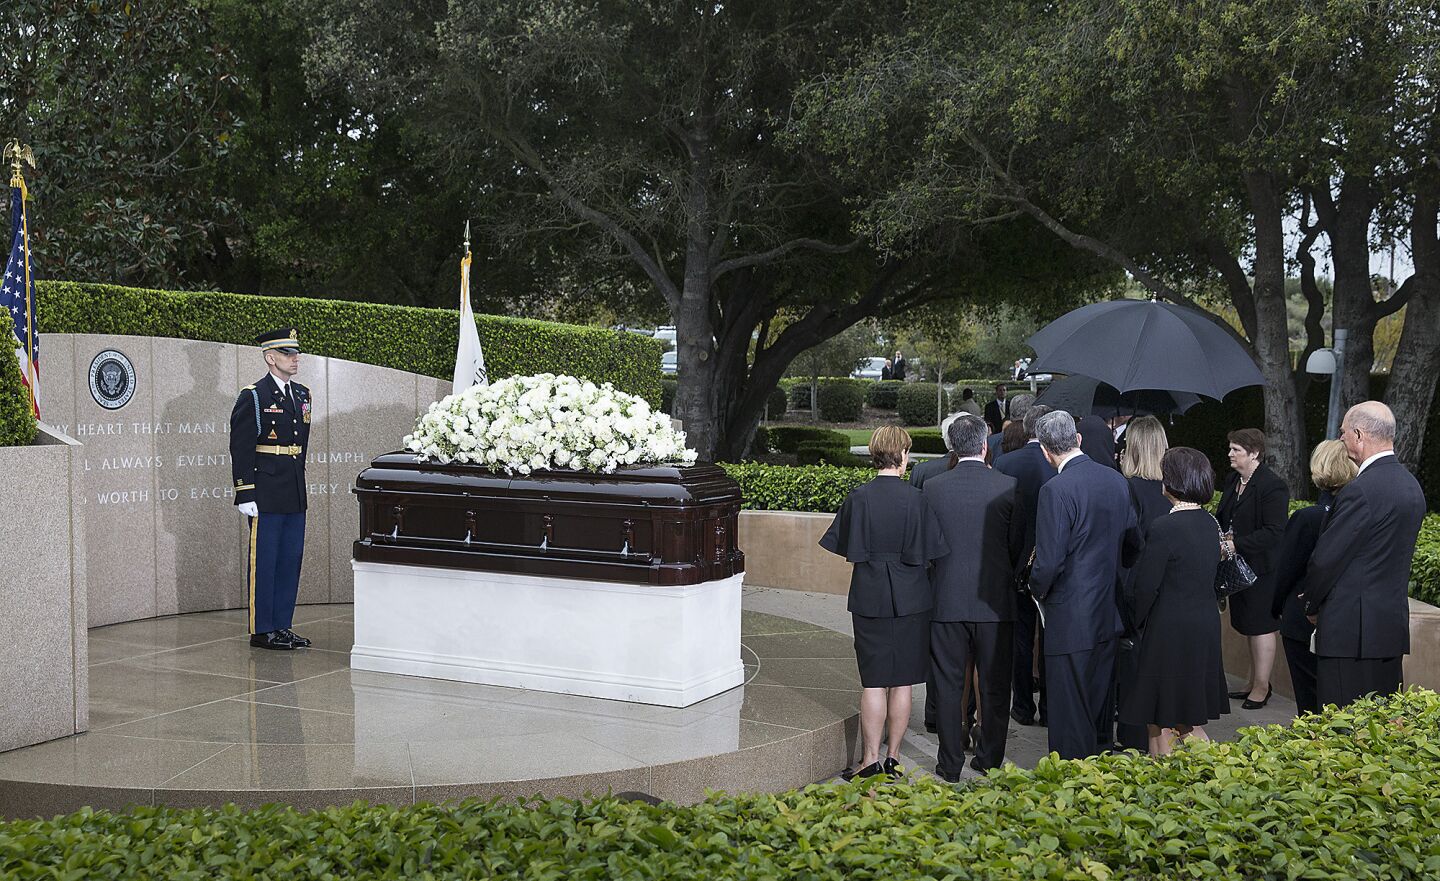 Mourners and family members pause at Nancy Reagan's gravesite at the Ronald Reagan Presidential Library in Simi Valley.